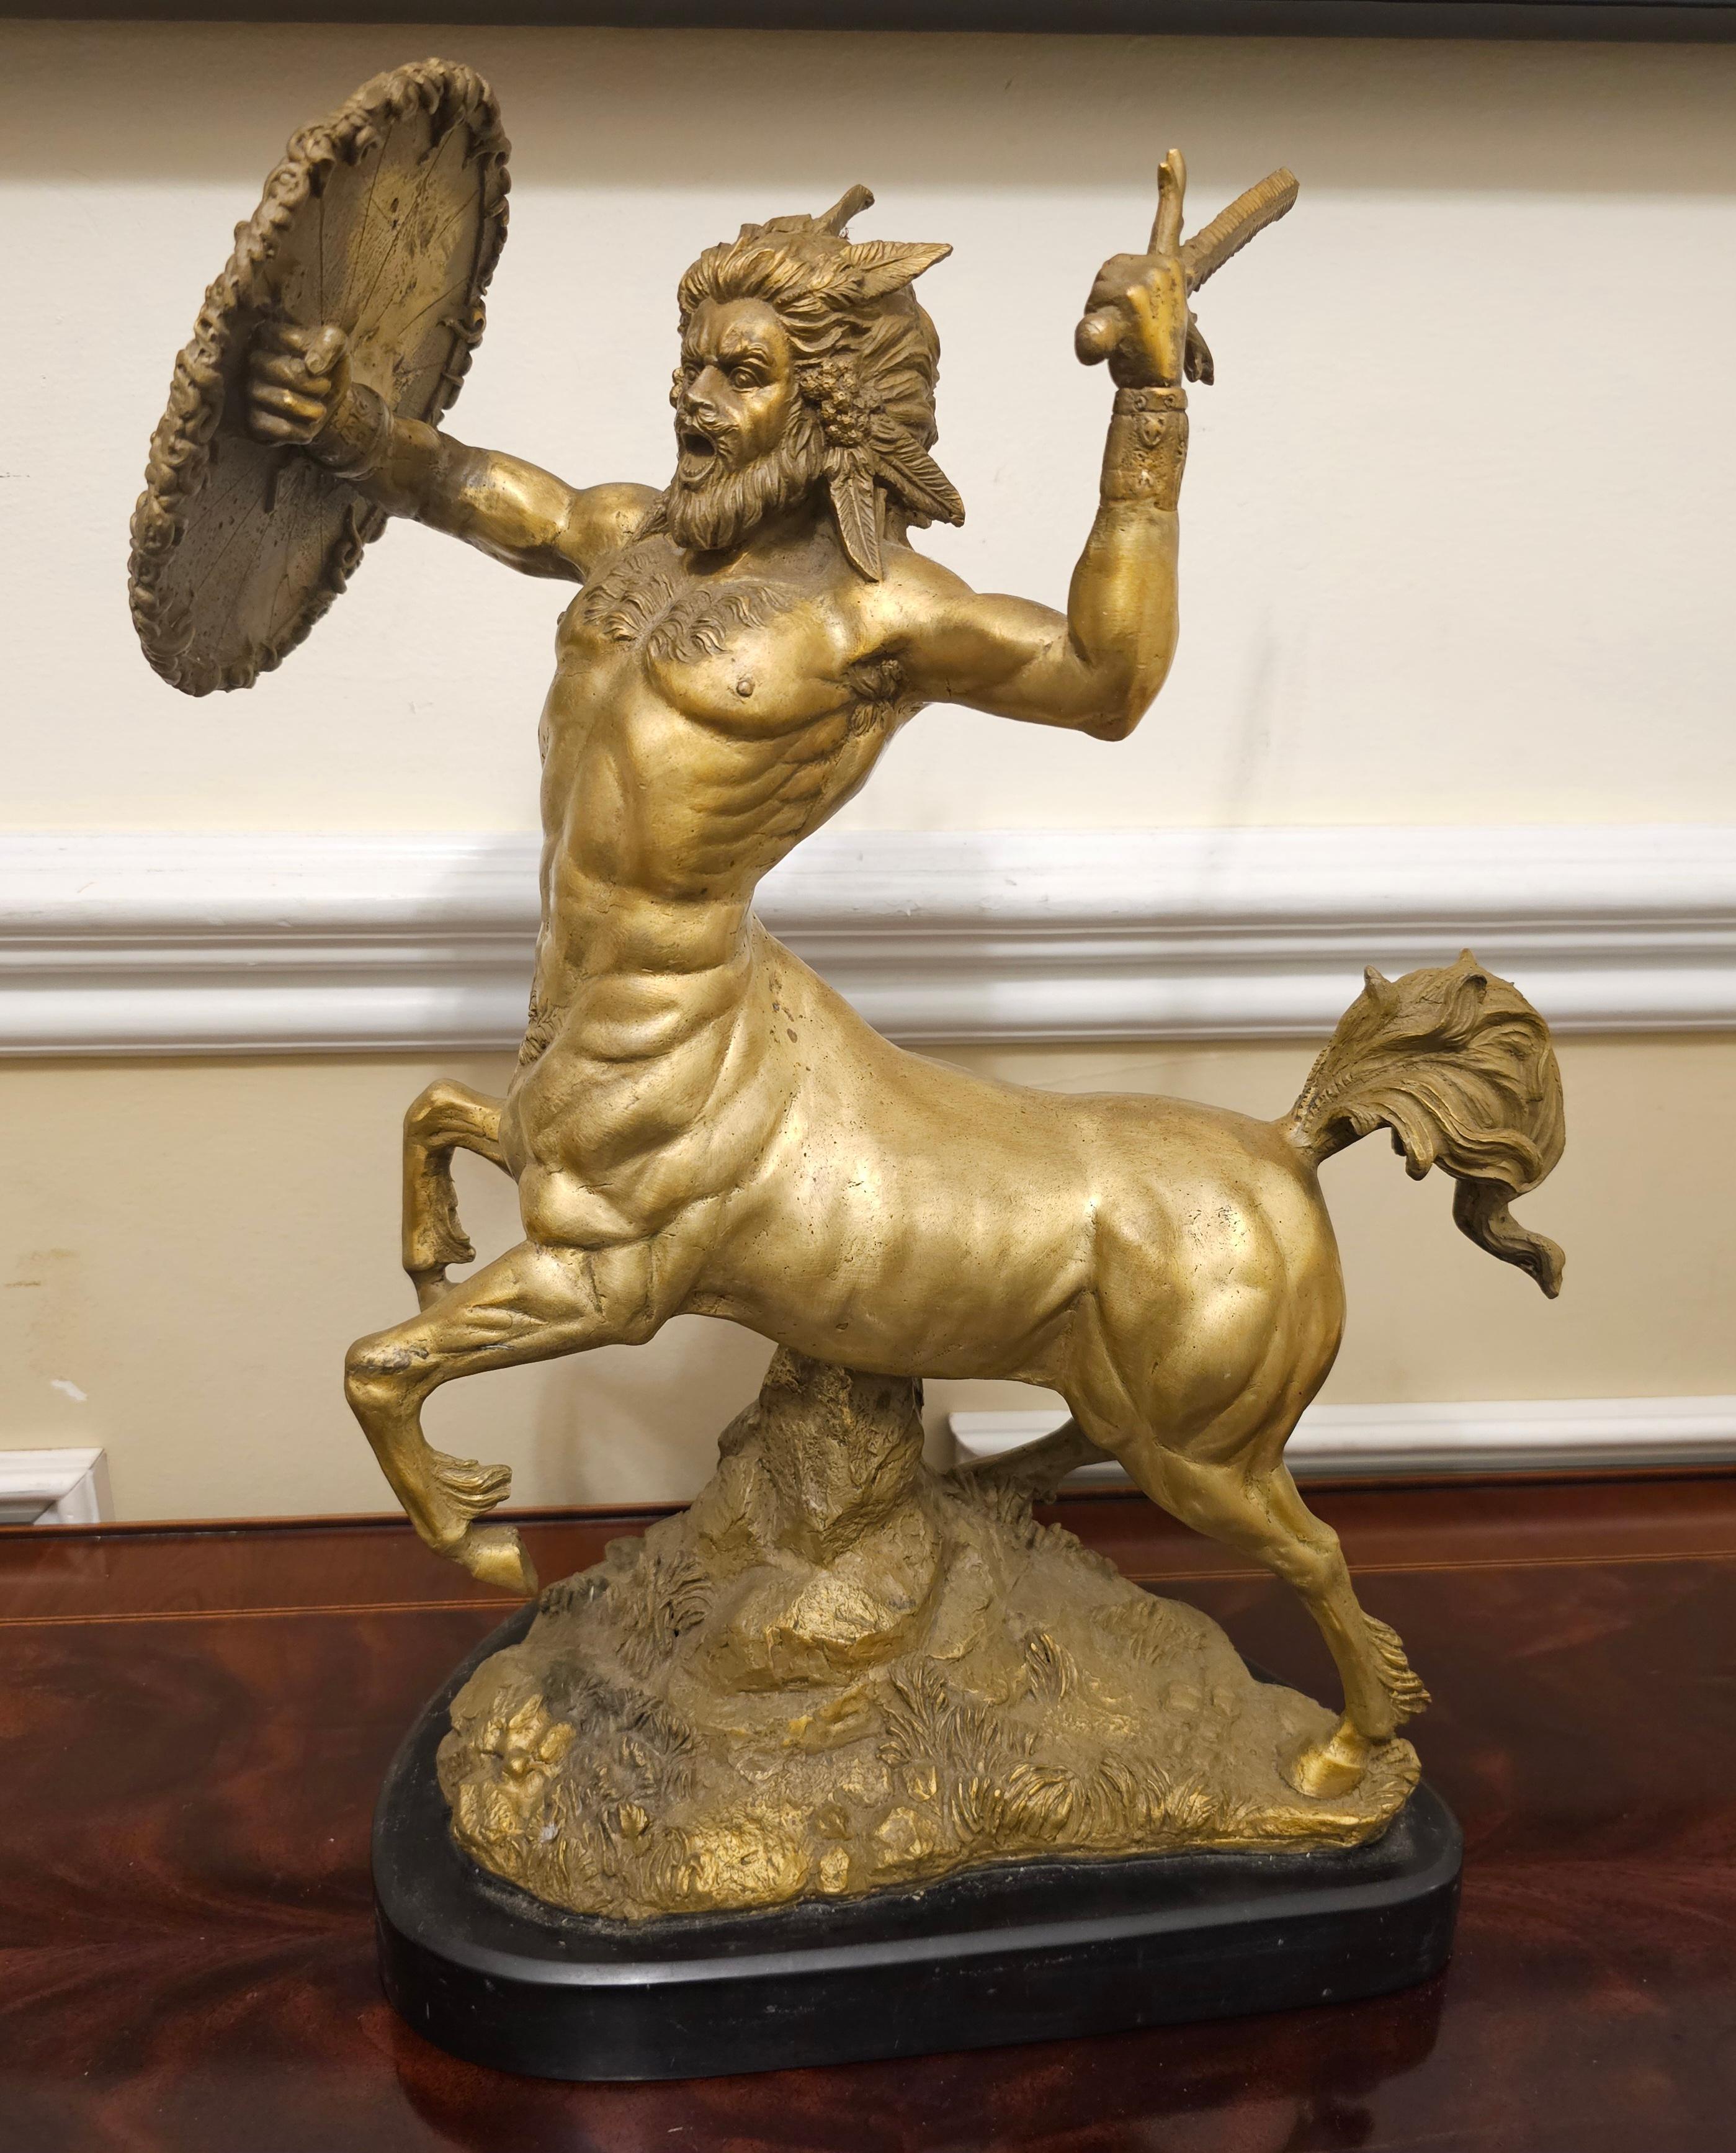 Stunning Dore Bronze Sculpture of a Centaur in Battle on  Slate Plinth. The Powerful Centaur Comes Barreling Out Of The Realm Of Greek Mythology Wielding A Sword And Shield Of Snakes In Hand. His Powerful Hooves Beat Down On The Ground As A Yell Of